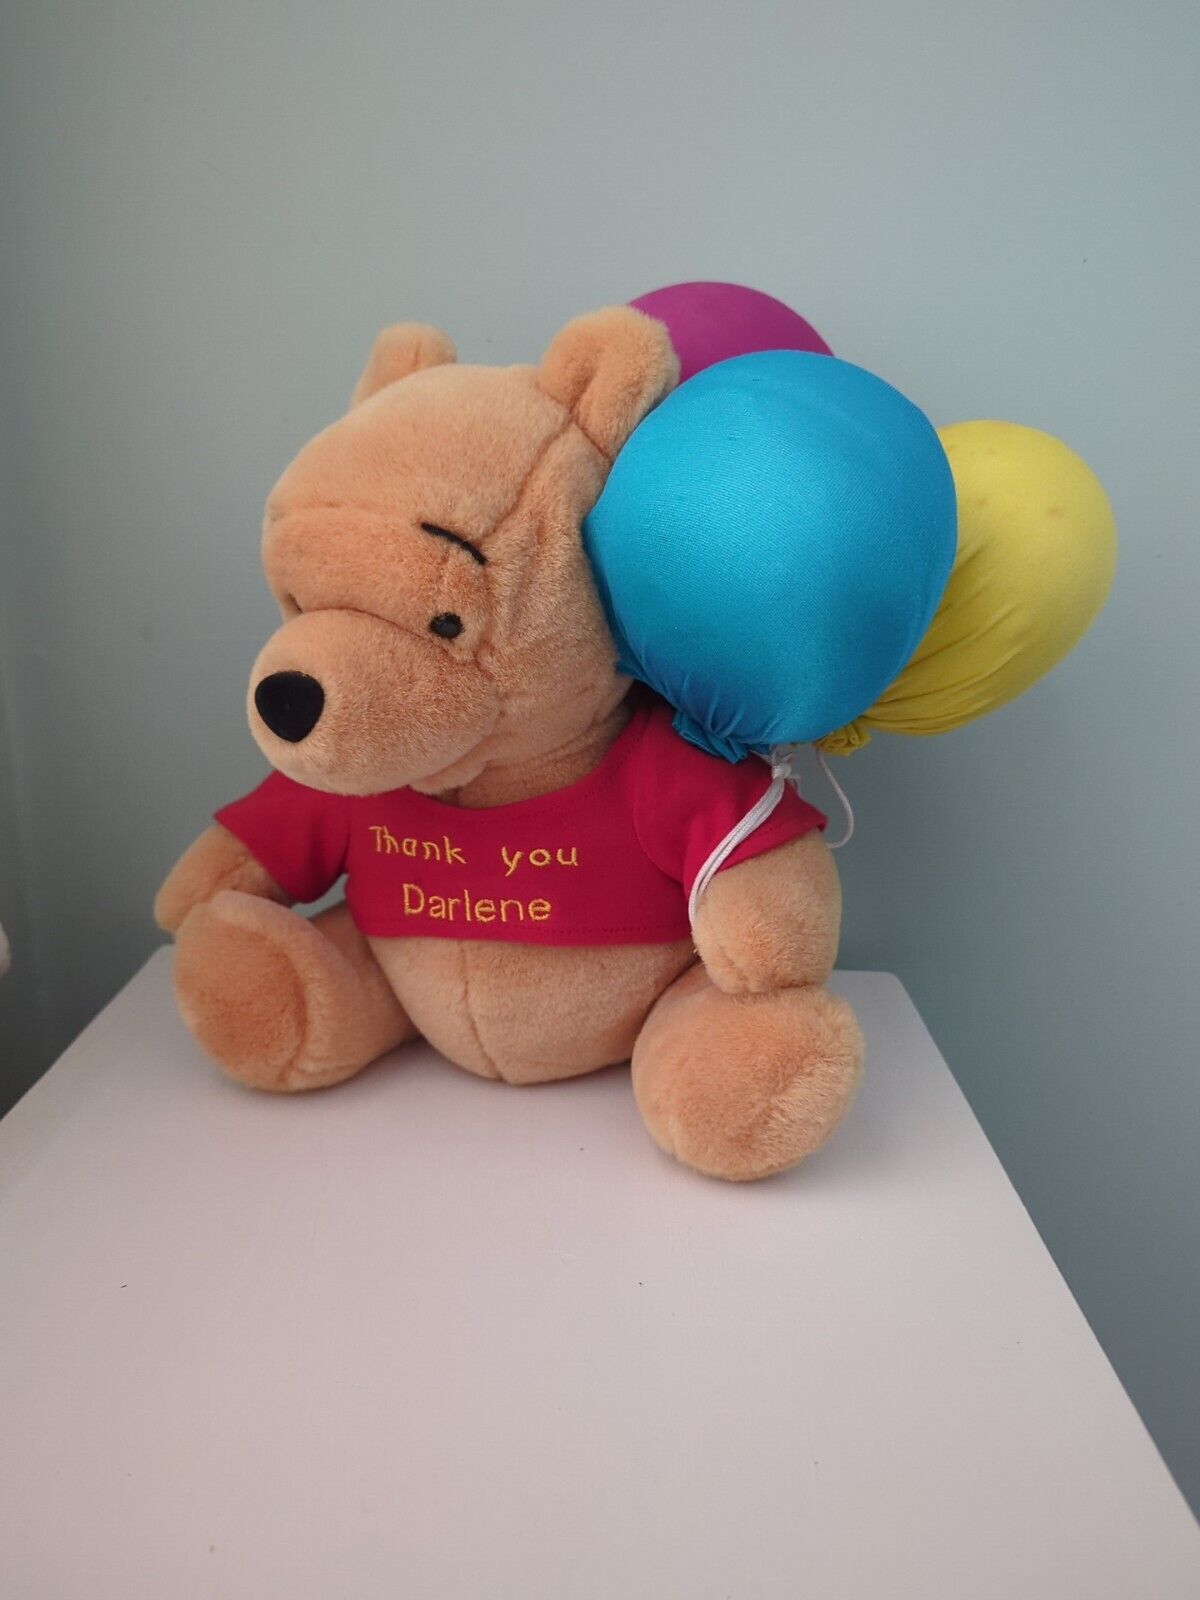 Vintage Winnie The Pooh Collectible Thank You Darlene Holding Balloons Plush